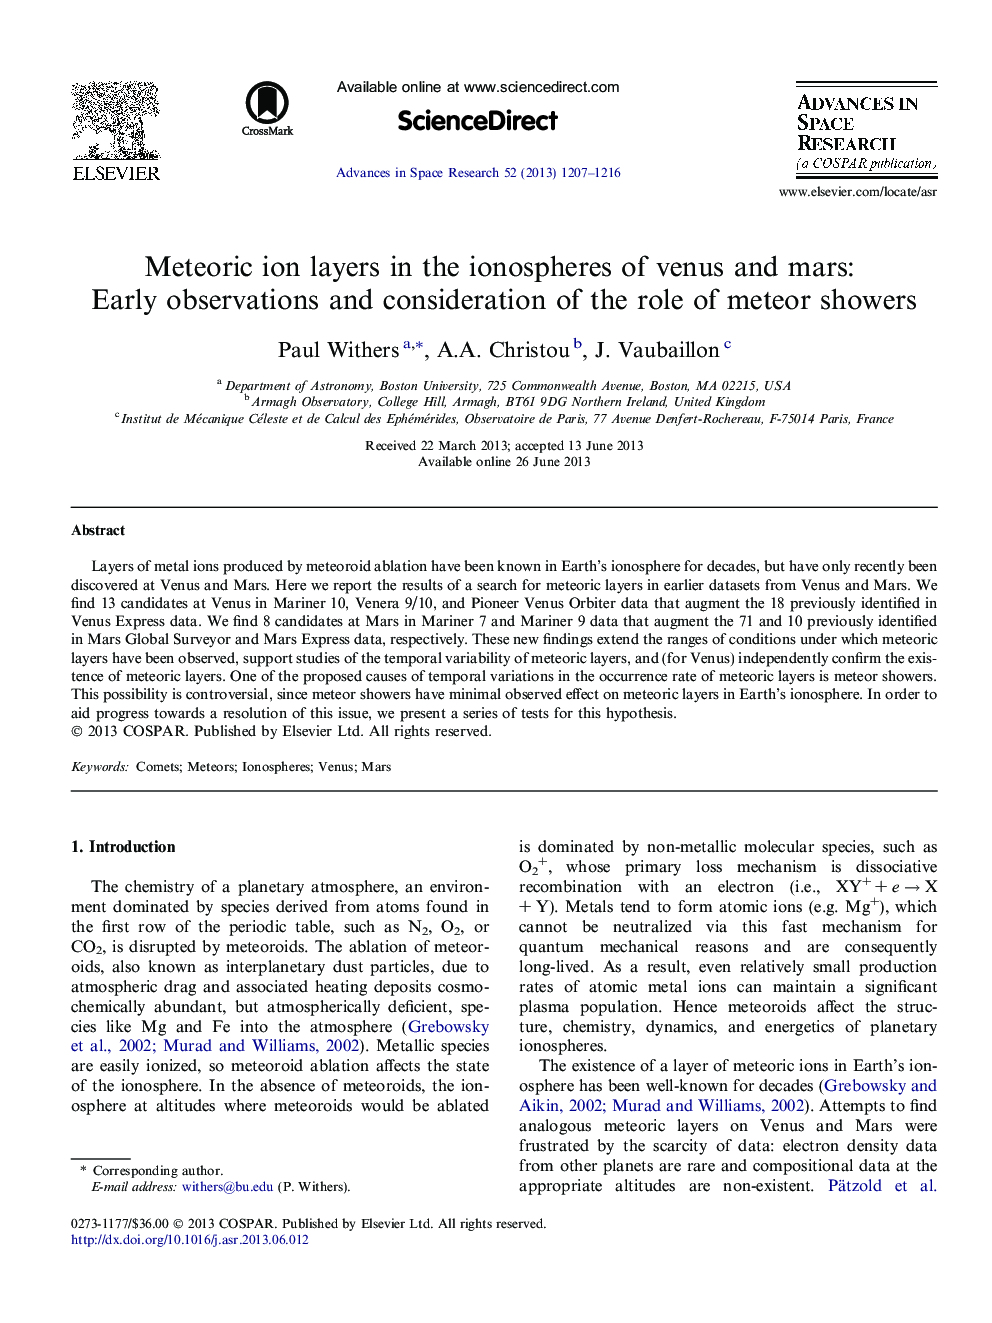 Meteoric ion layers in the ionospheres of venus and mars: Early observations and consideration of the role of meteor showers